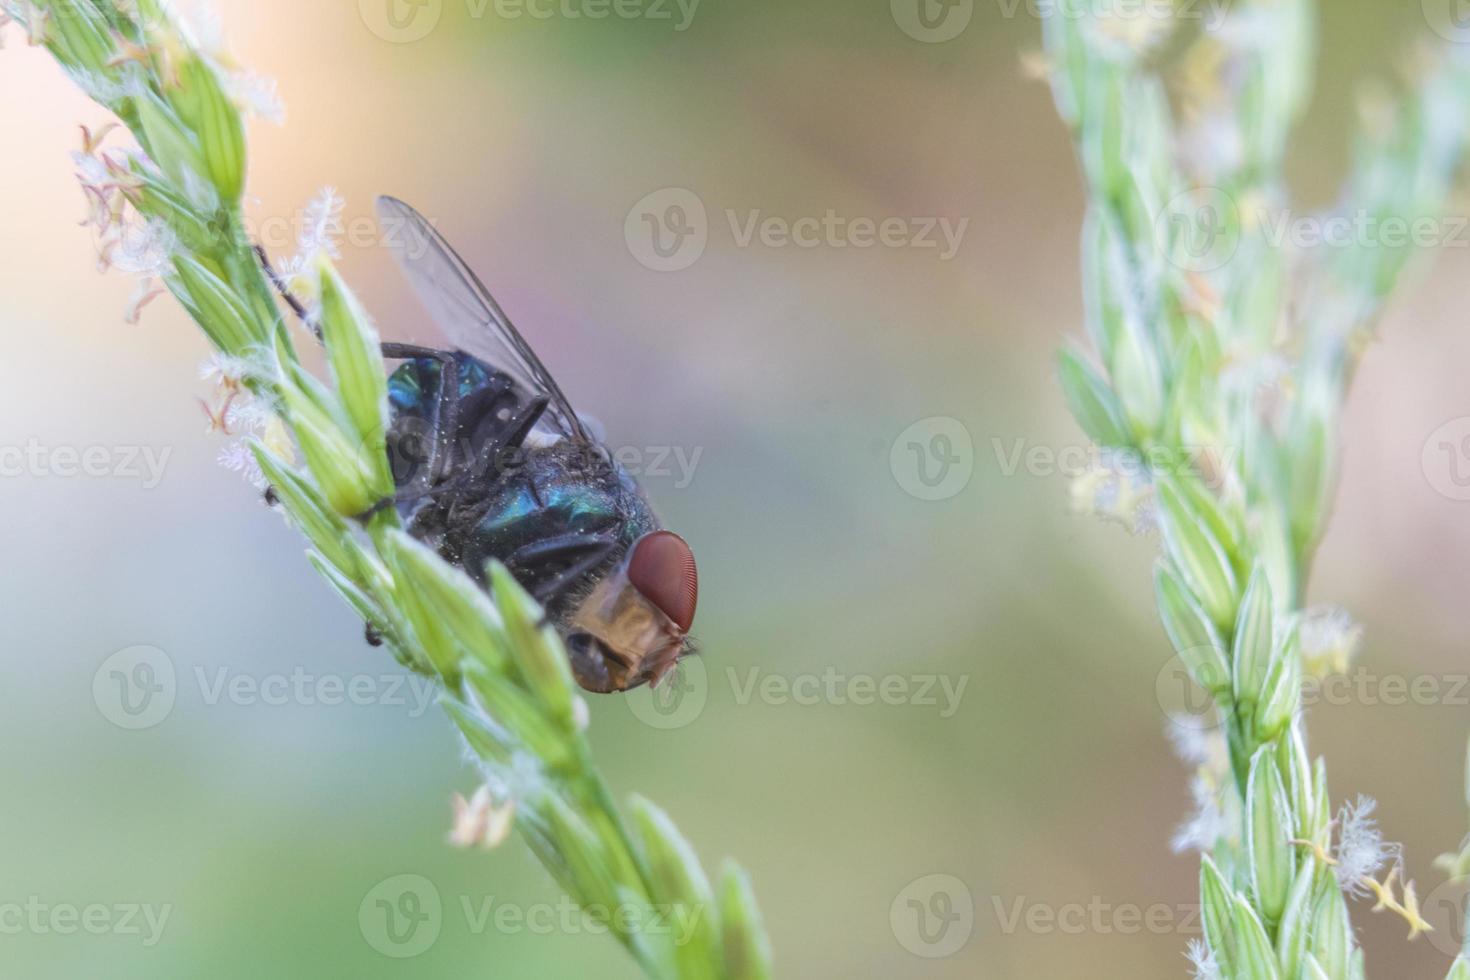 The Common Housefly (Musca Domestica) photo